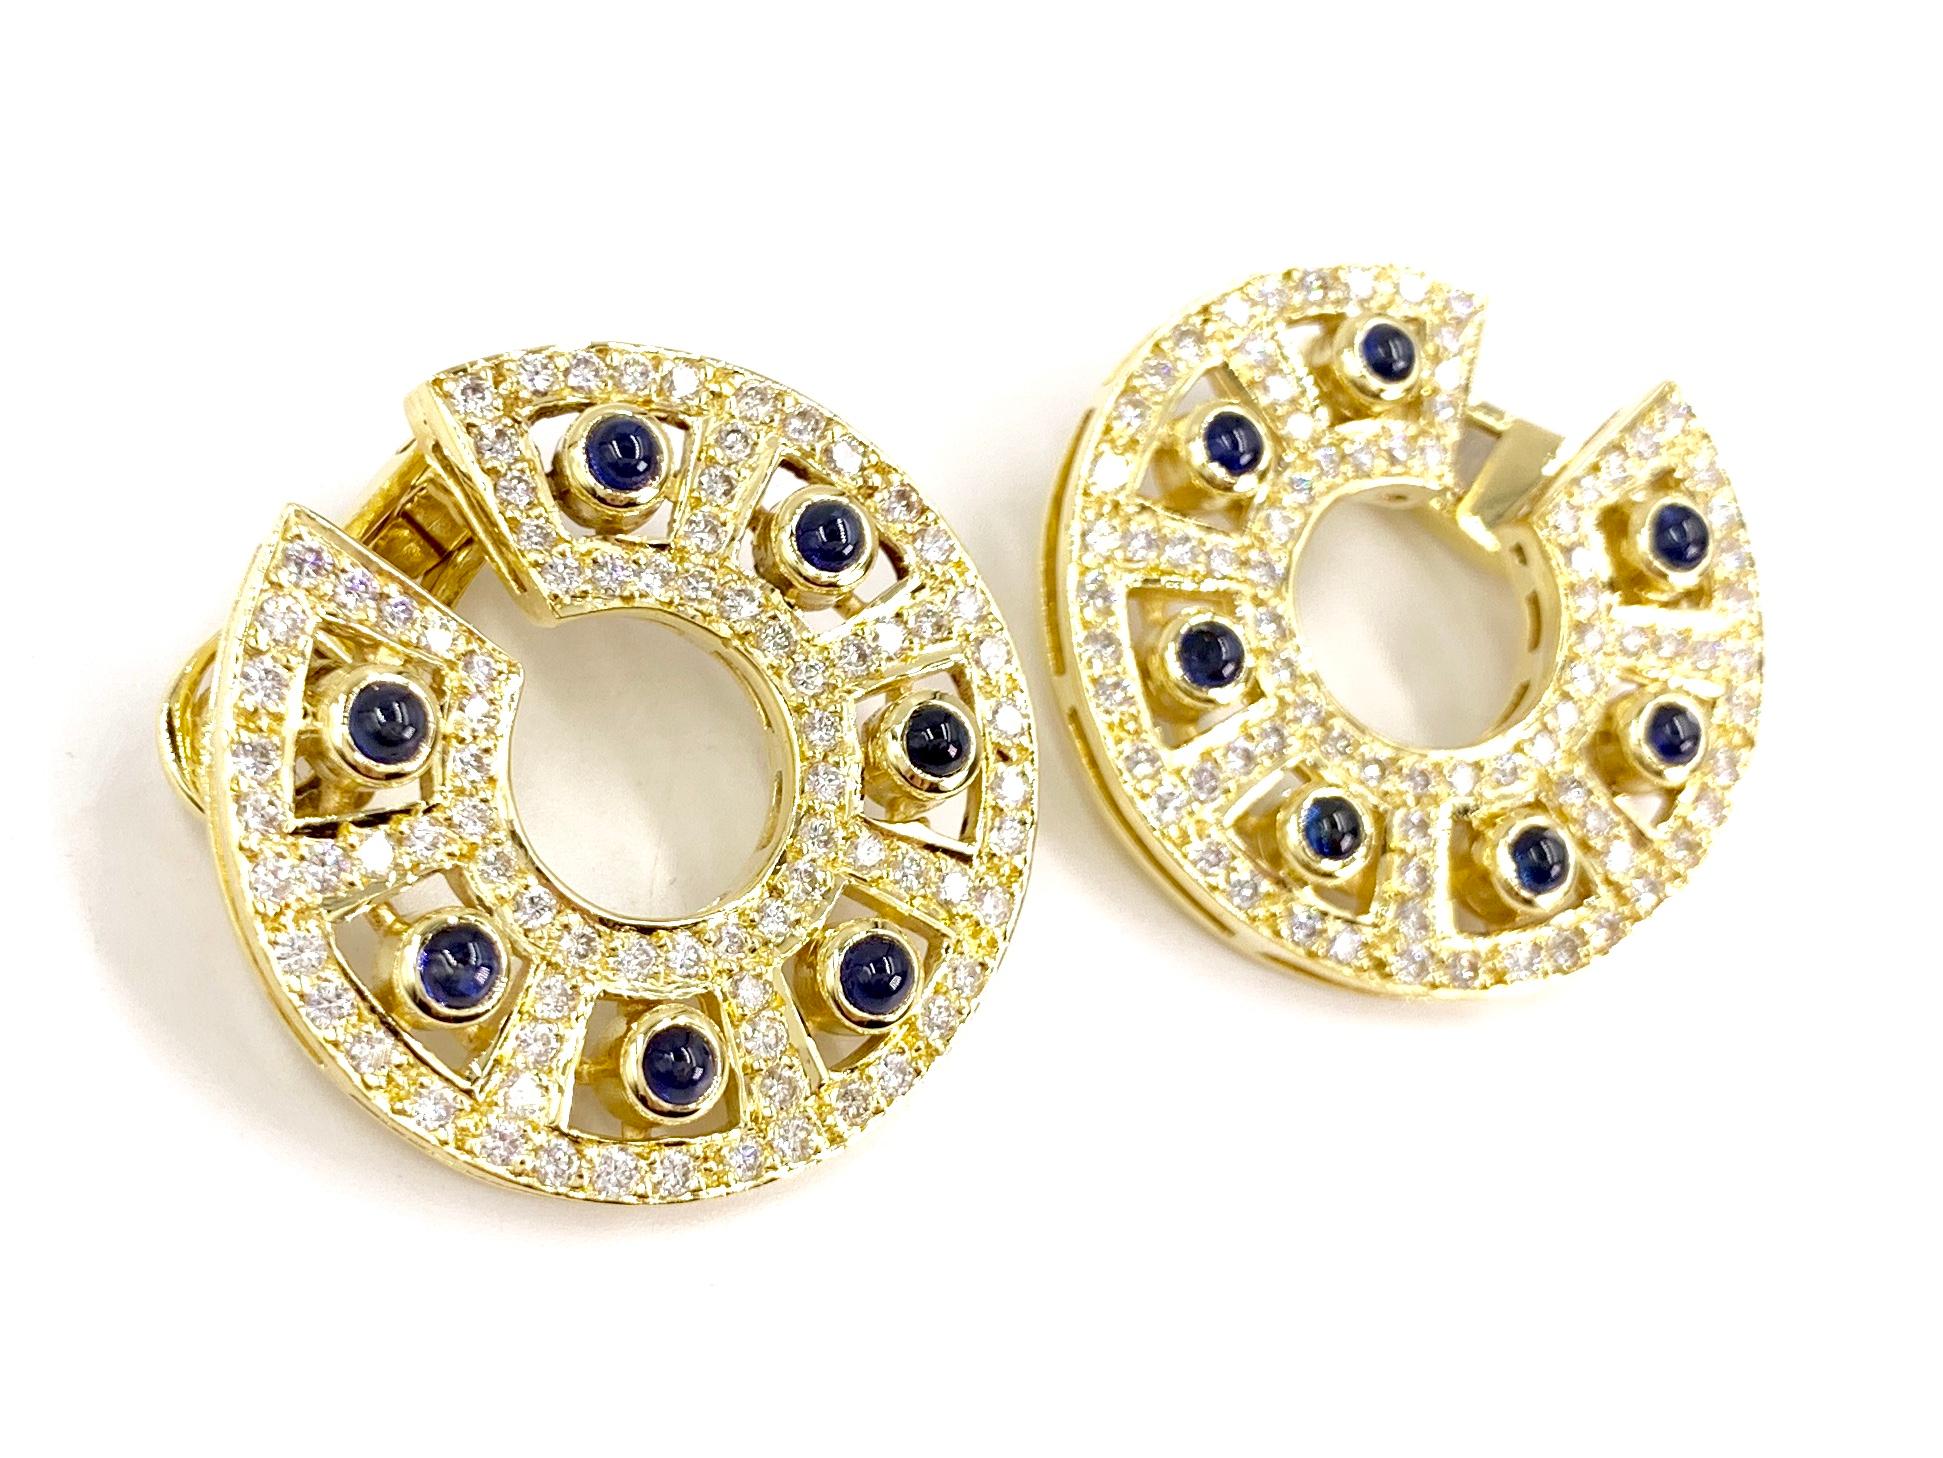 Well made 18 karat yellow gold C style forward facing hoop earrings featuring approximately 2 carats of round brilliant white diamonds and approximately 4 carats of cabochon blue sapphires. Diamond quality is approximately G color, VS2 clarity.